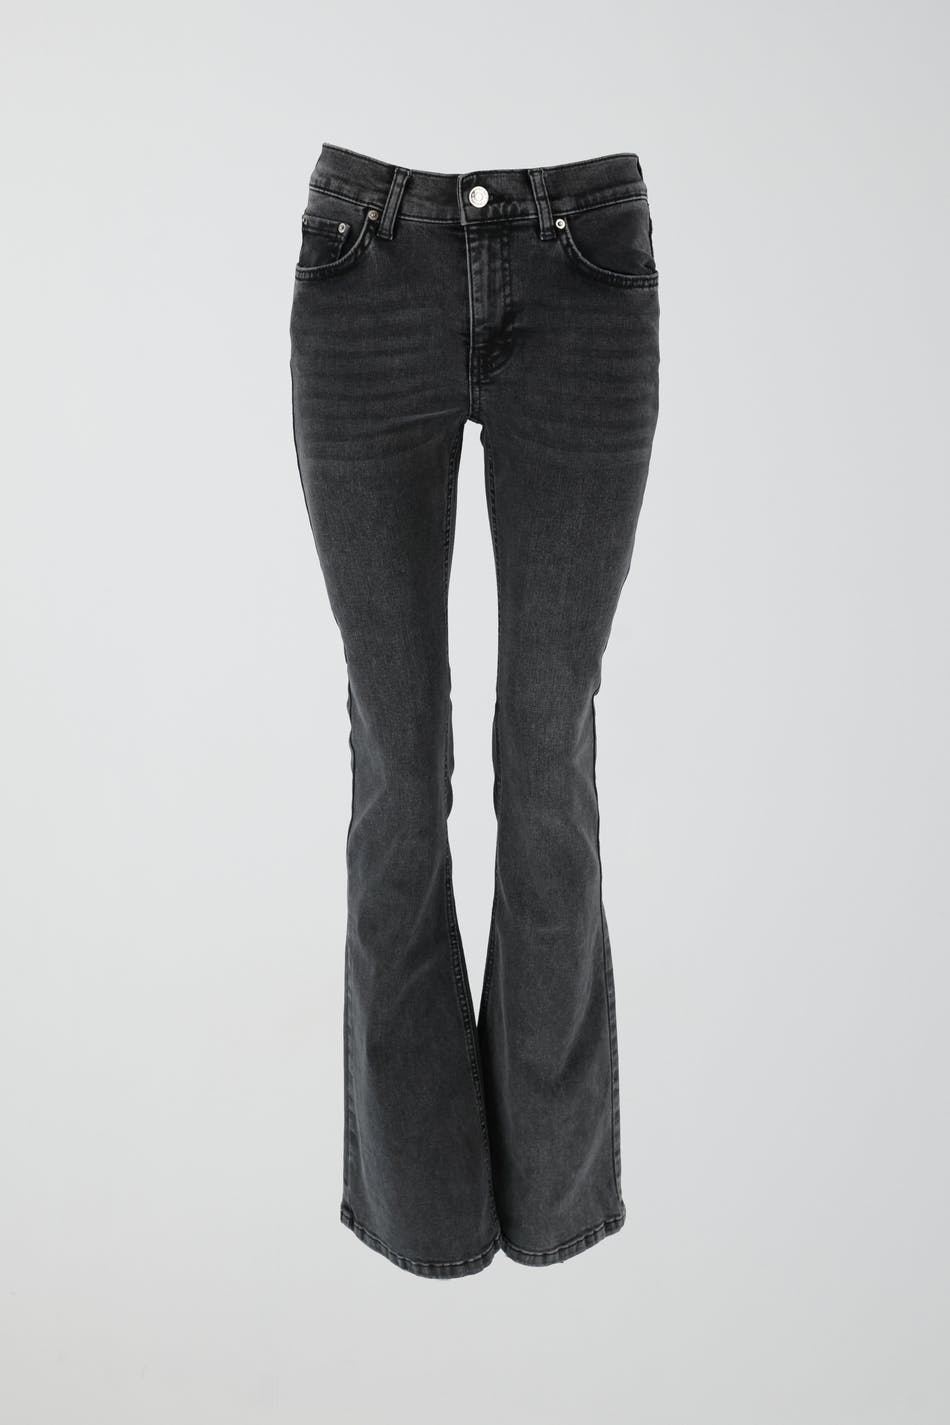 Gina Tricot - Low waist tall bootcut jeans - flare & wide jeans - Grey - 38 - Female